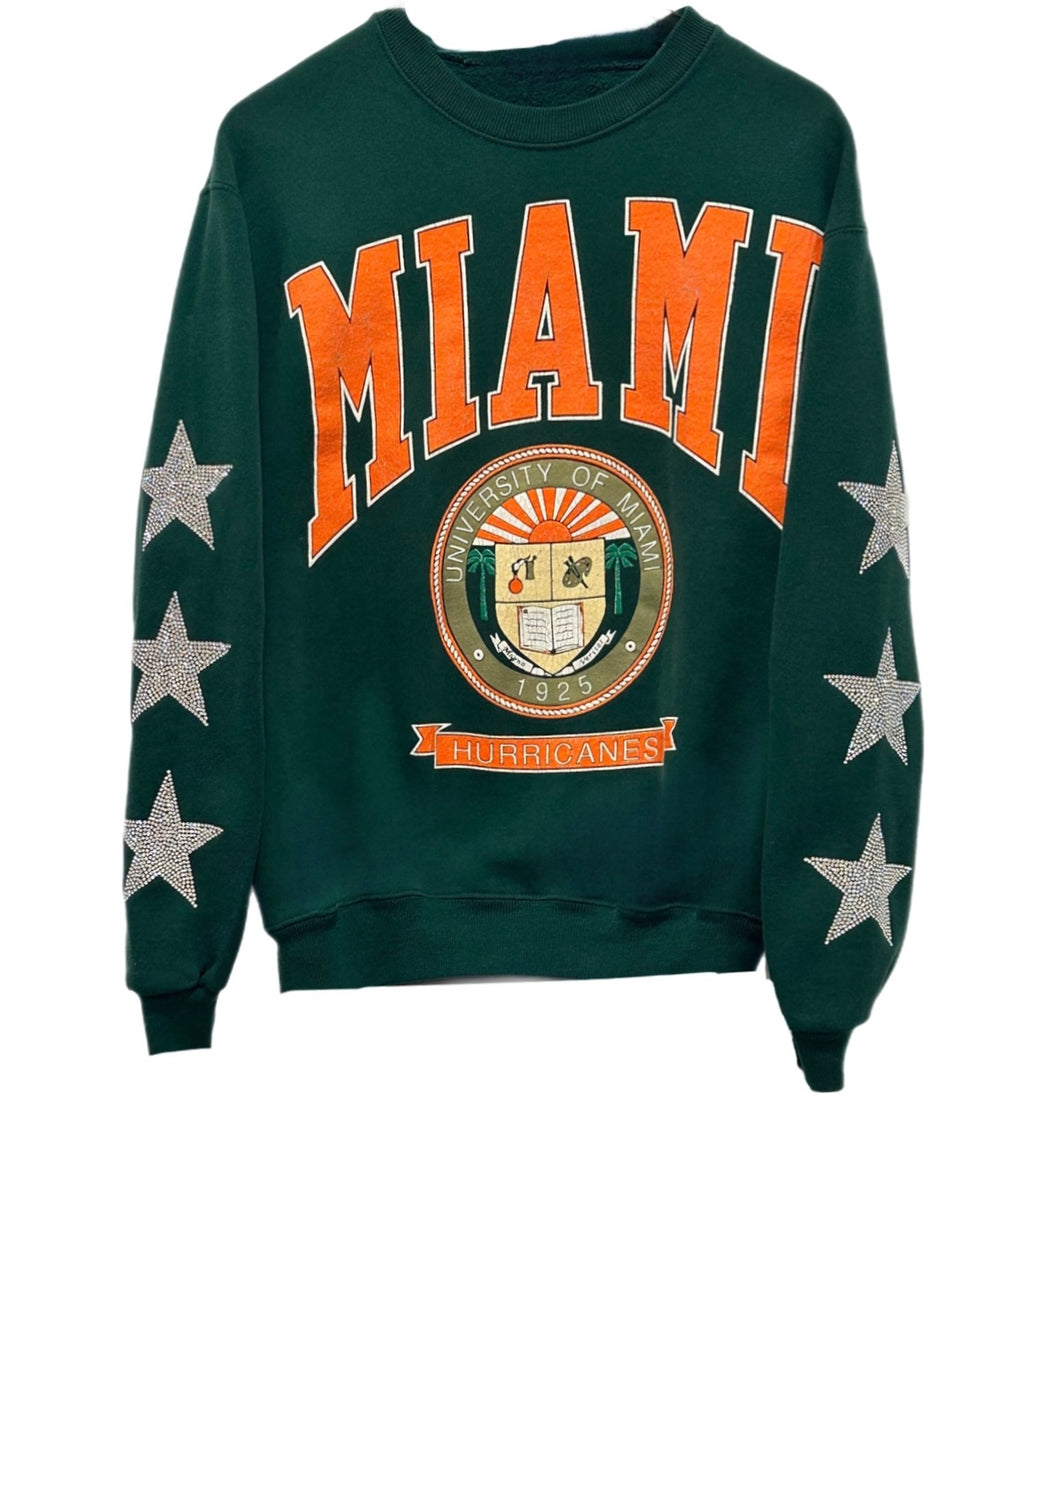 University of Miami, One of a KIND Vintage Miami Hurricanes Sweatshirt with  Crystal Star Design